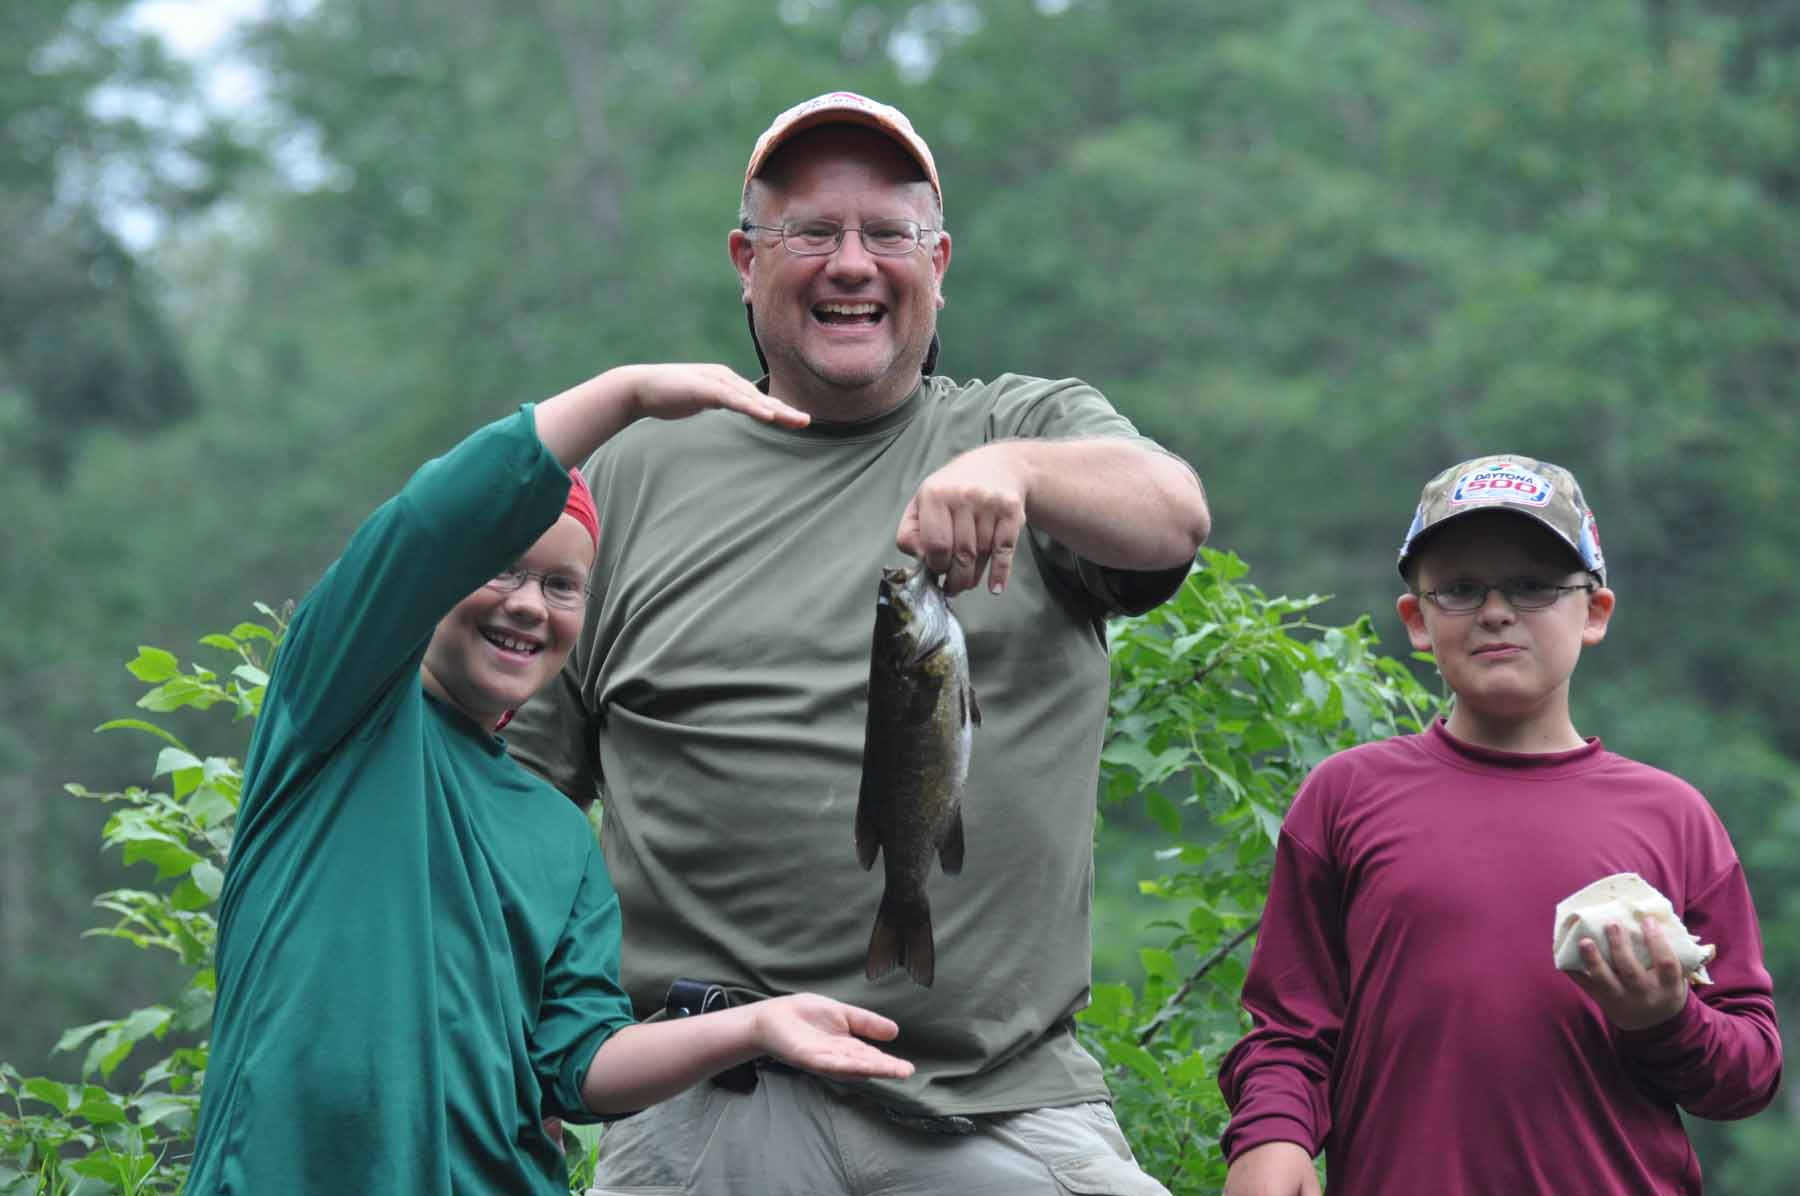 A dad and two sons go fishing to temper the effects of coronavirus isolation.